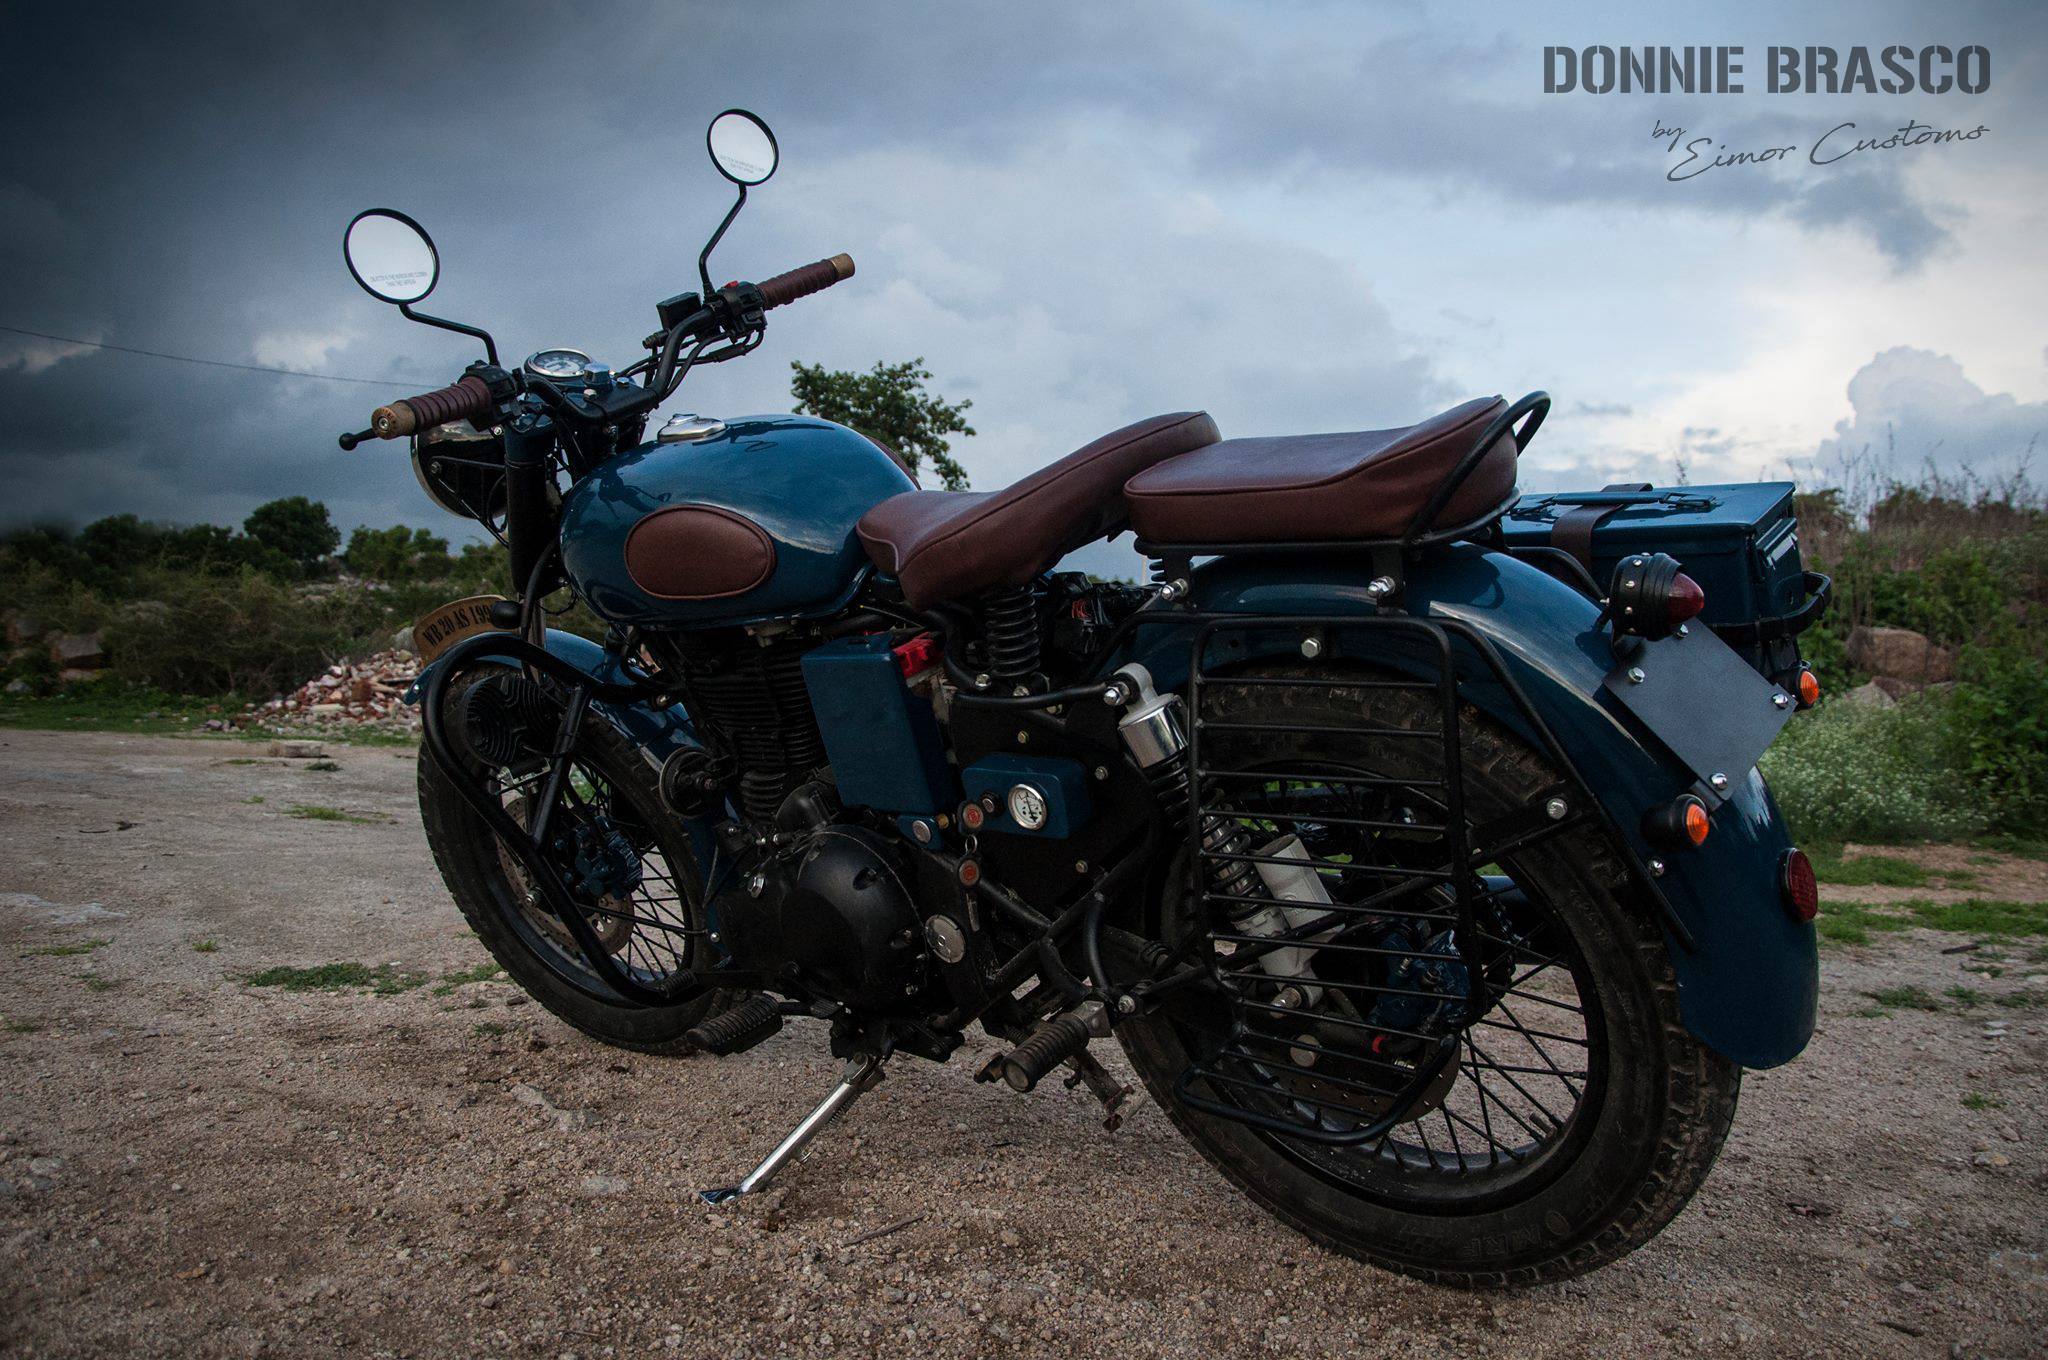 EIMOR Royal Enfield Classic 'Donnie Brasco' Details and Photos - wide